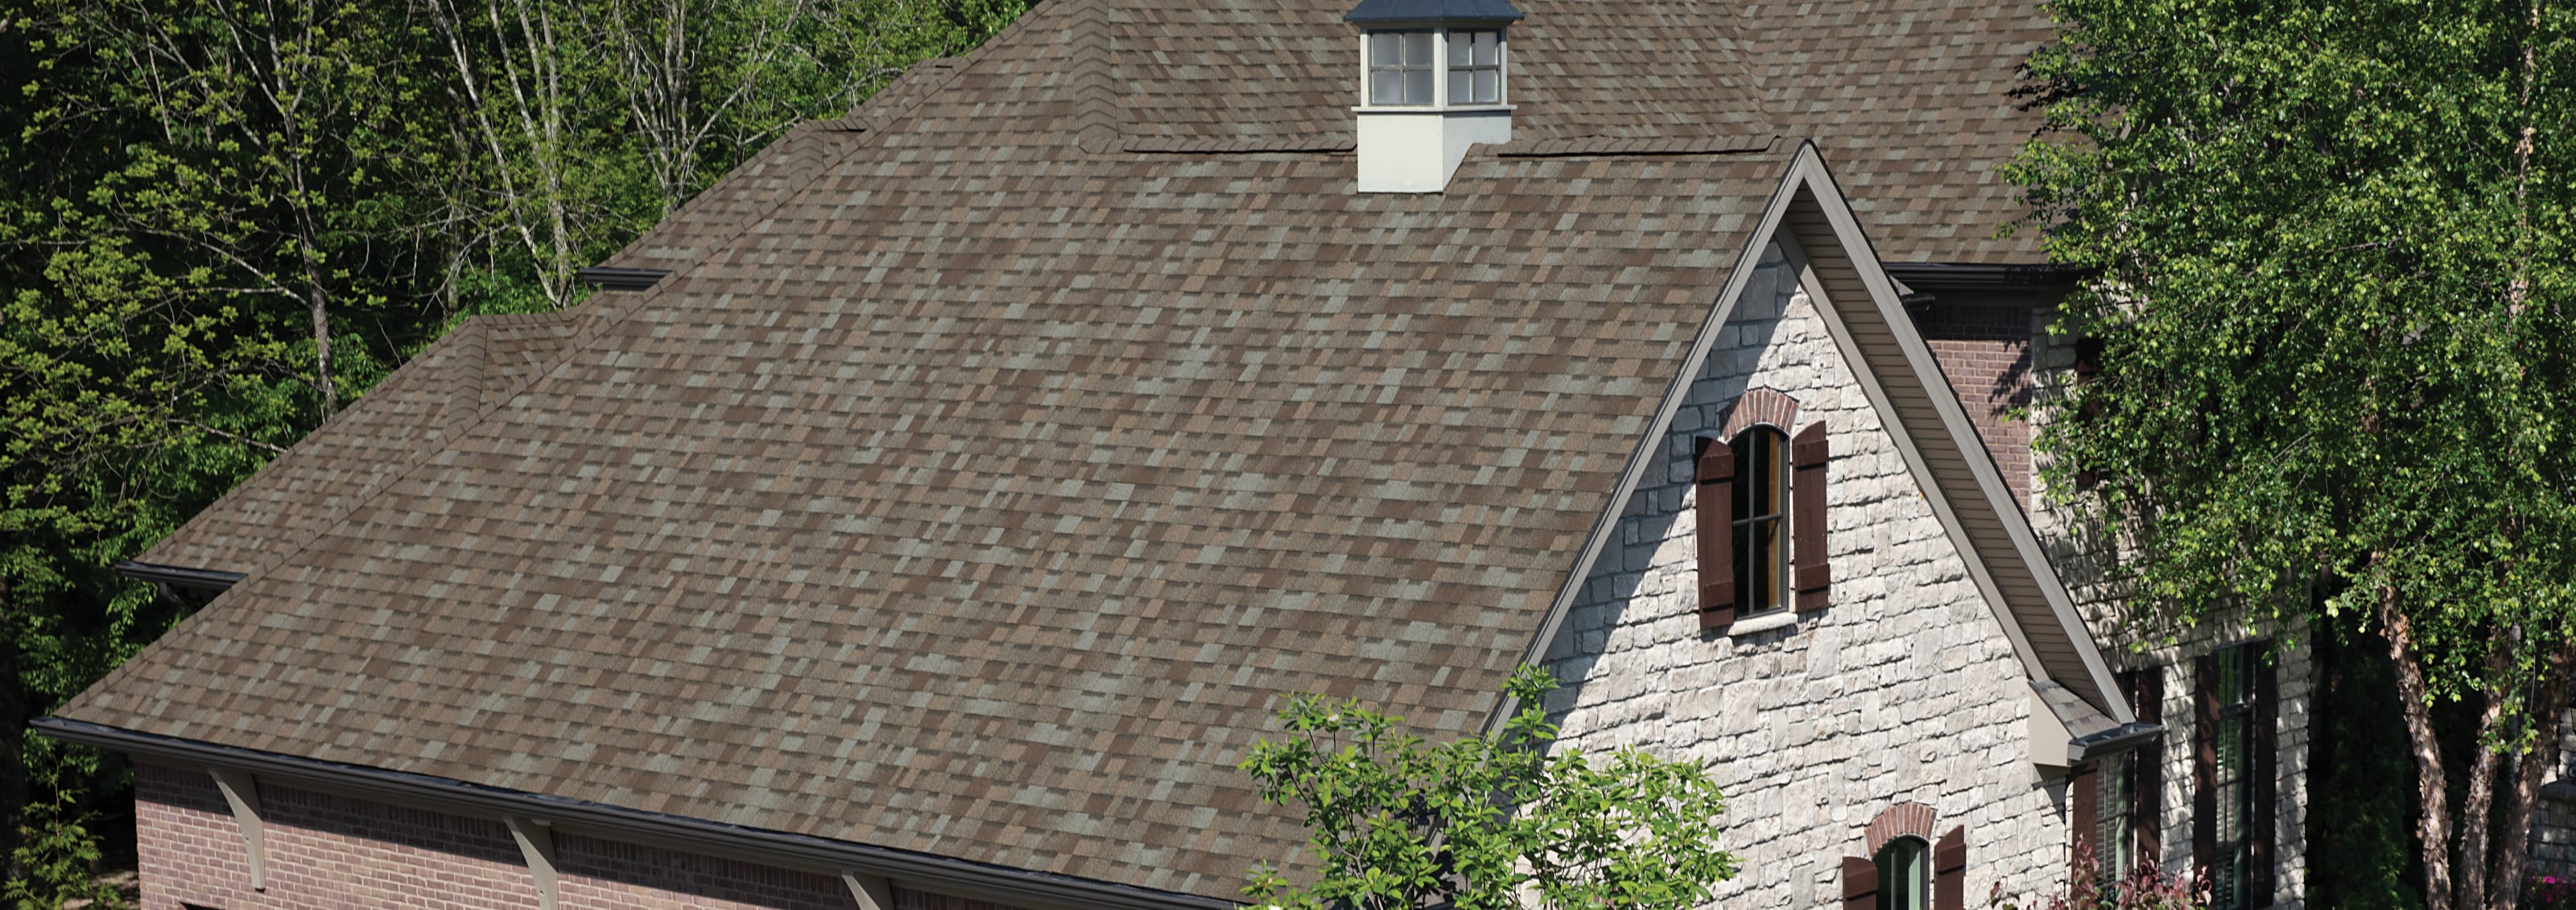 Pros And Cons Of Owning Owens Corning (NYSE:OC)